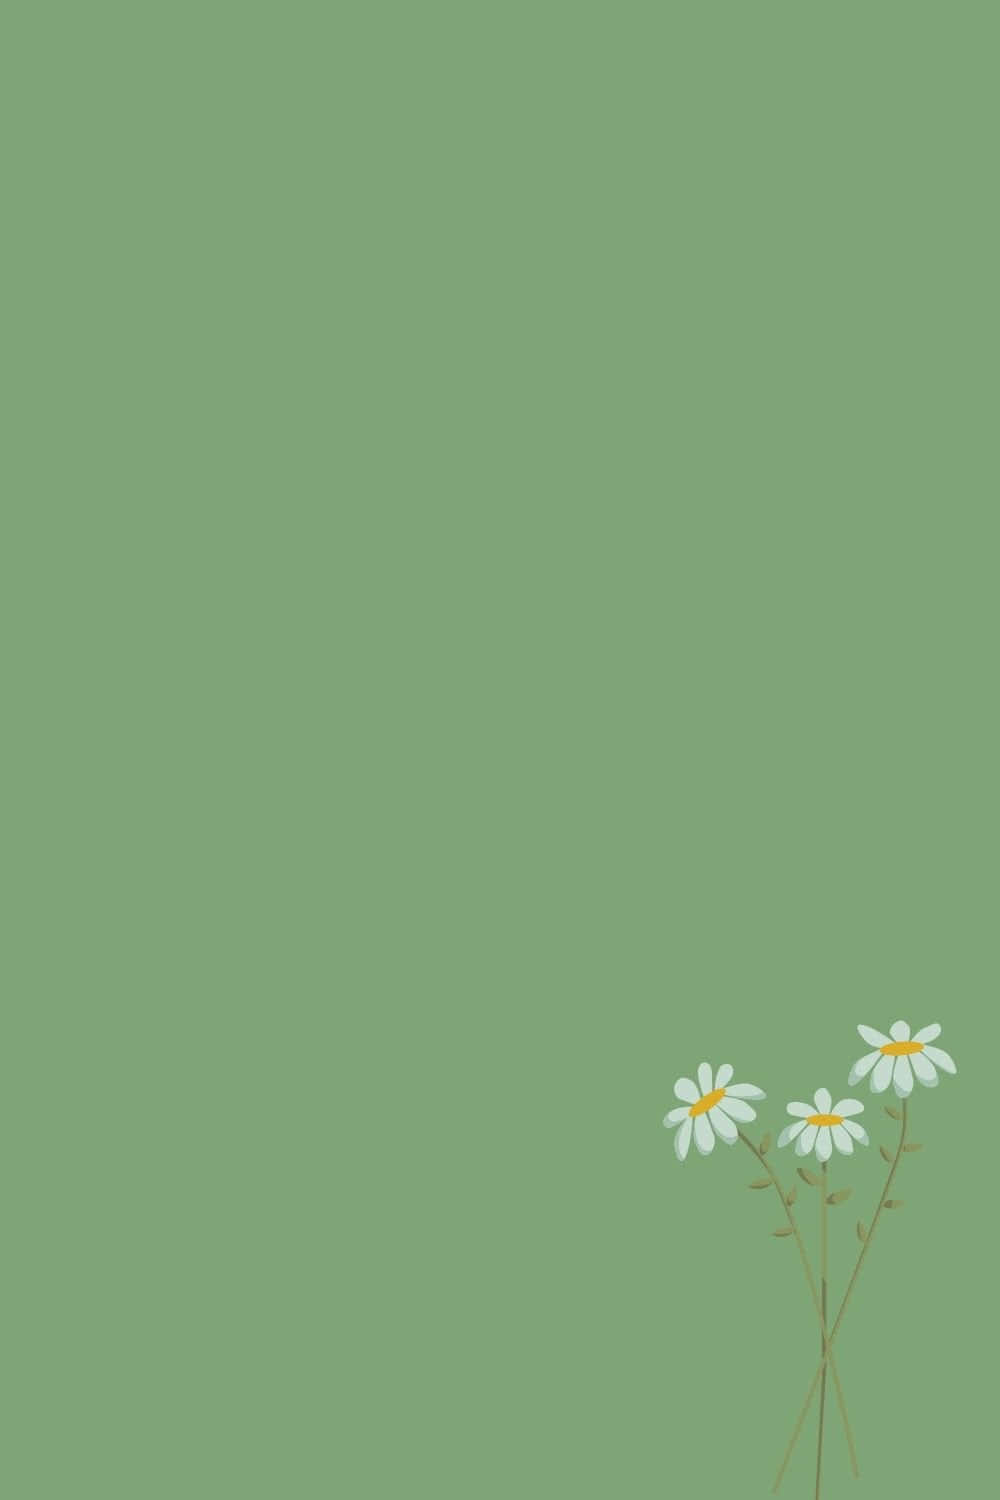 Daisies On A Green Background